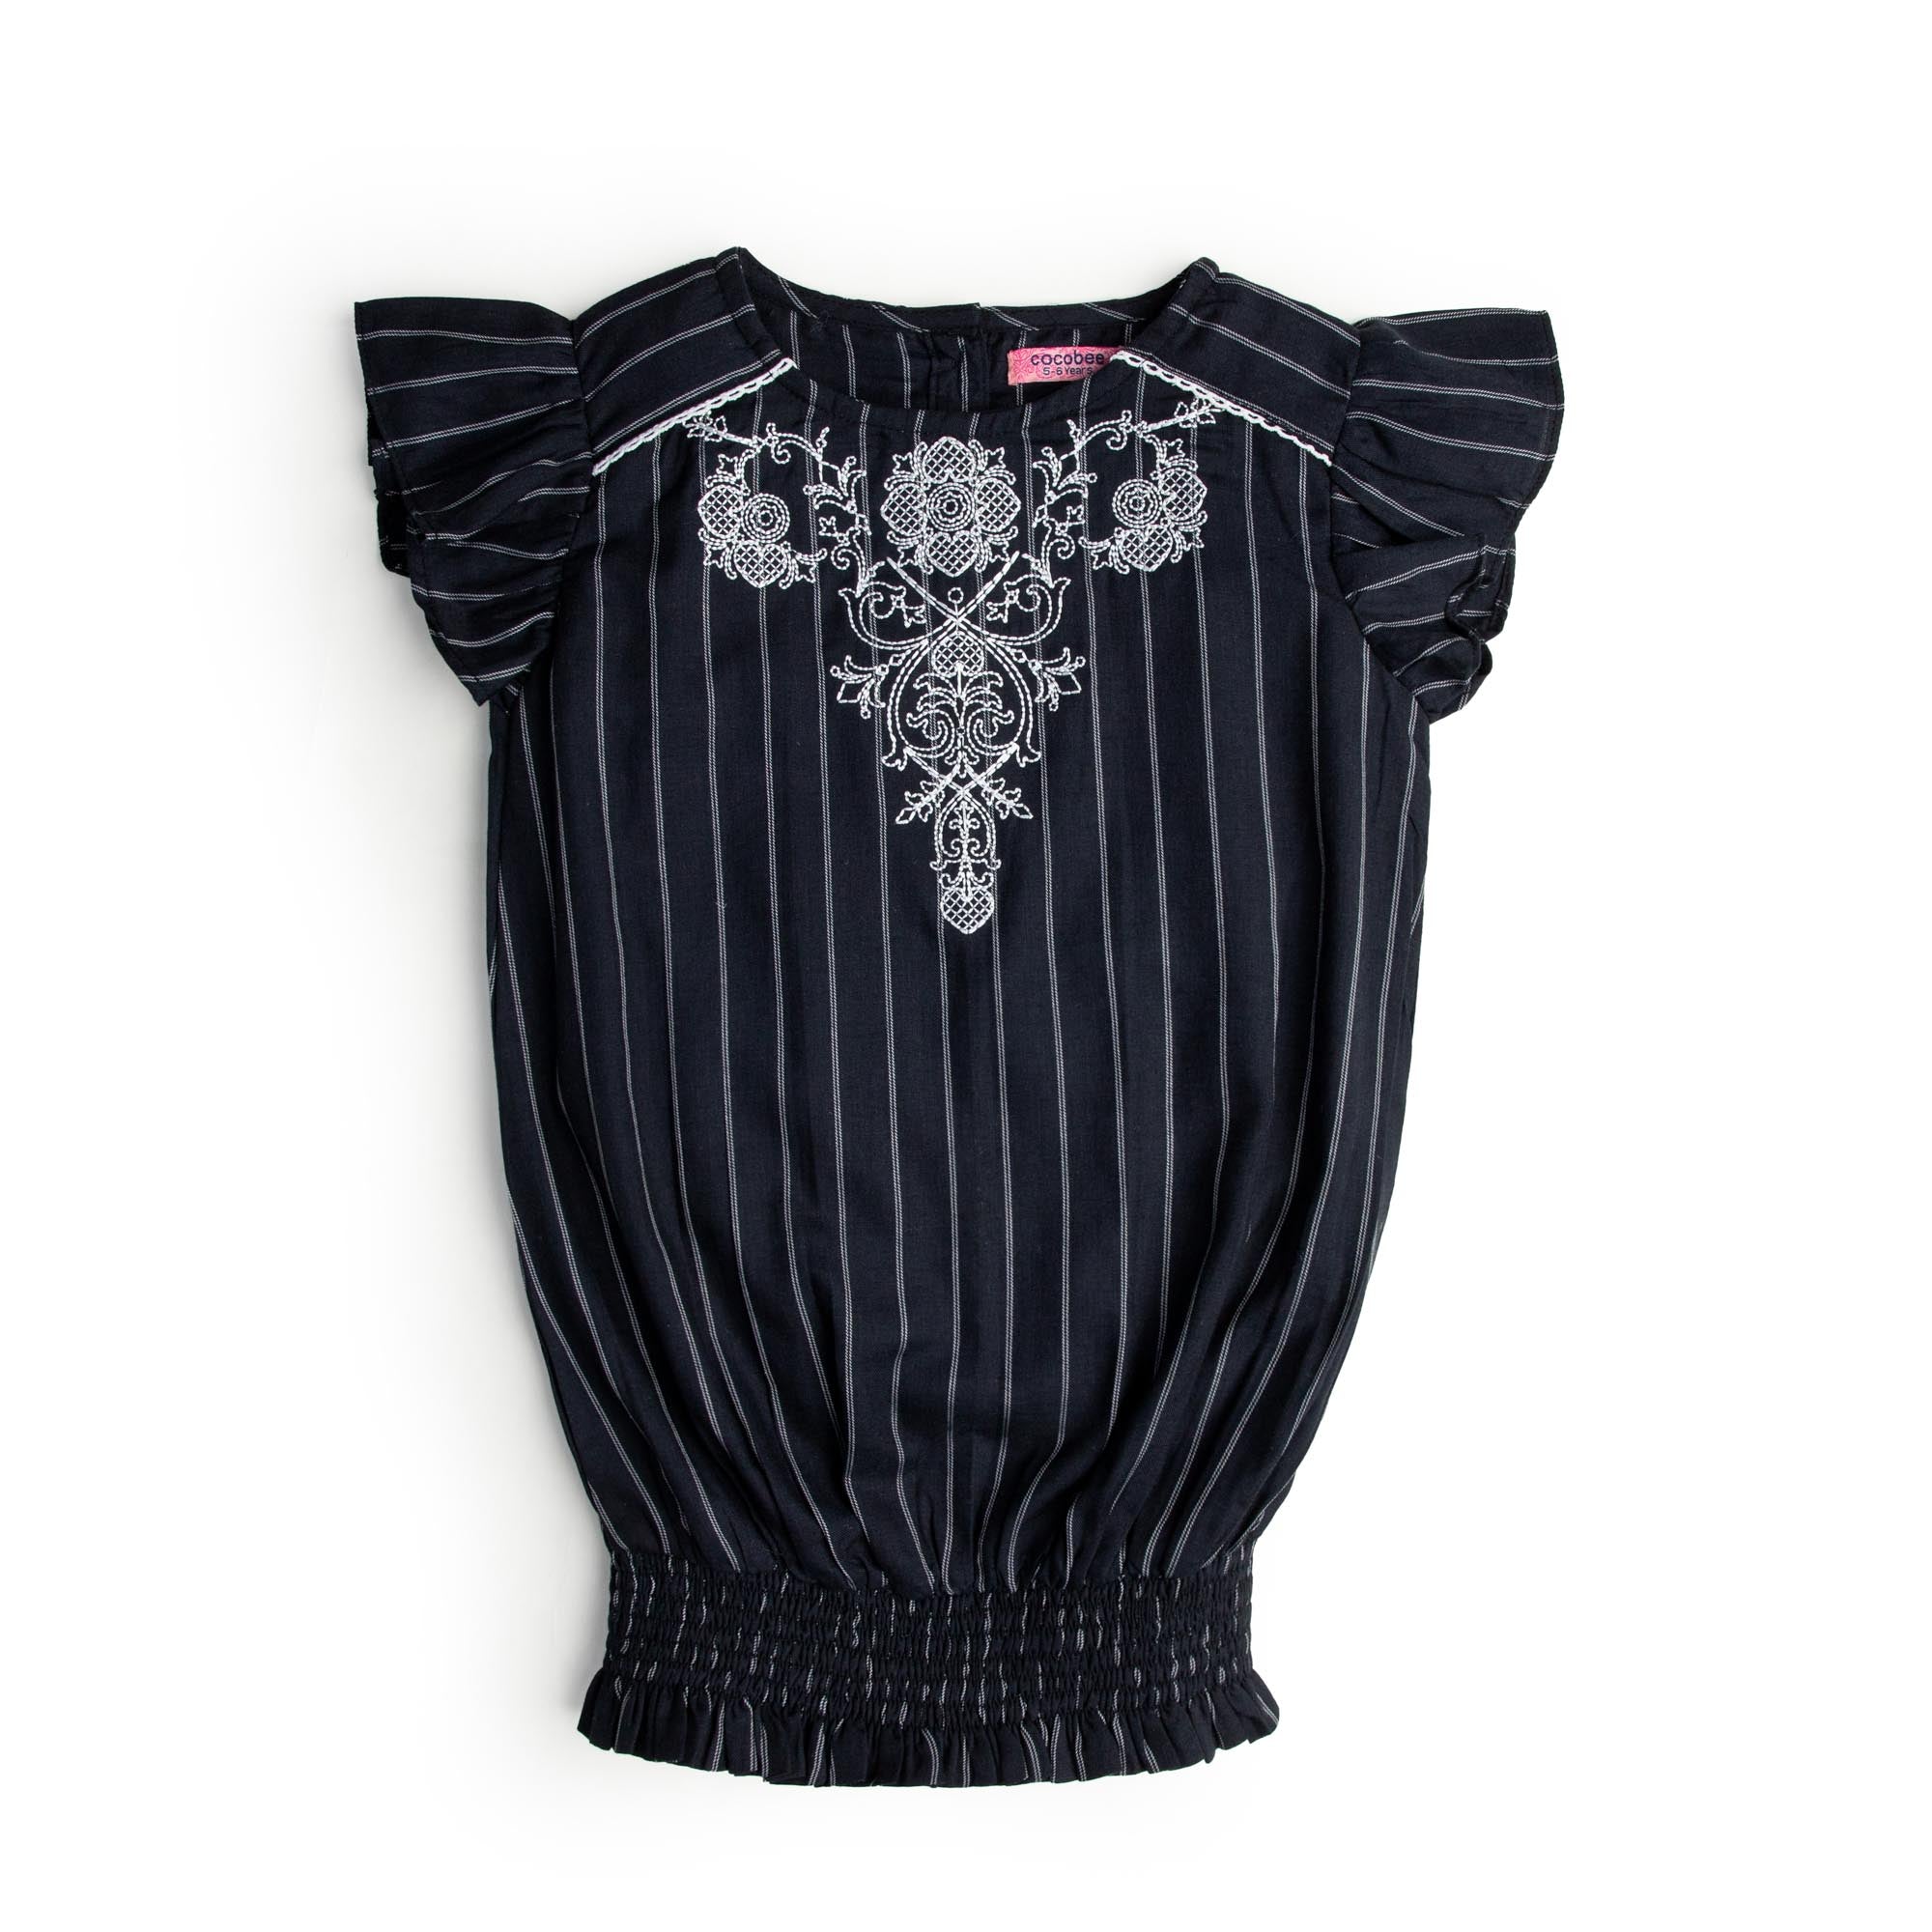 Murky Black Embroidered Top